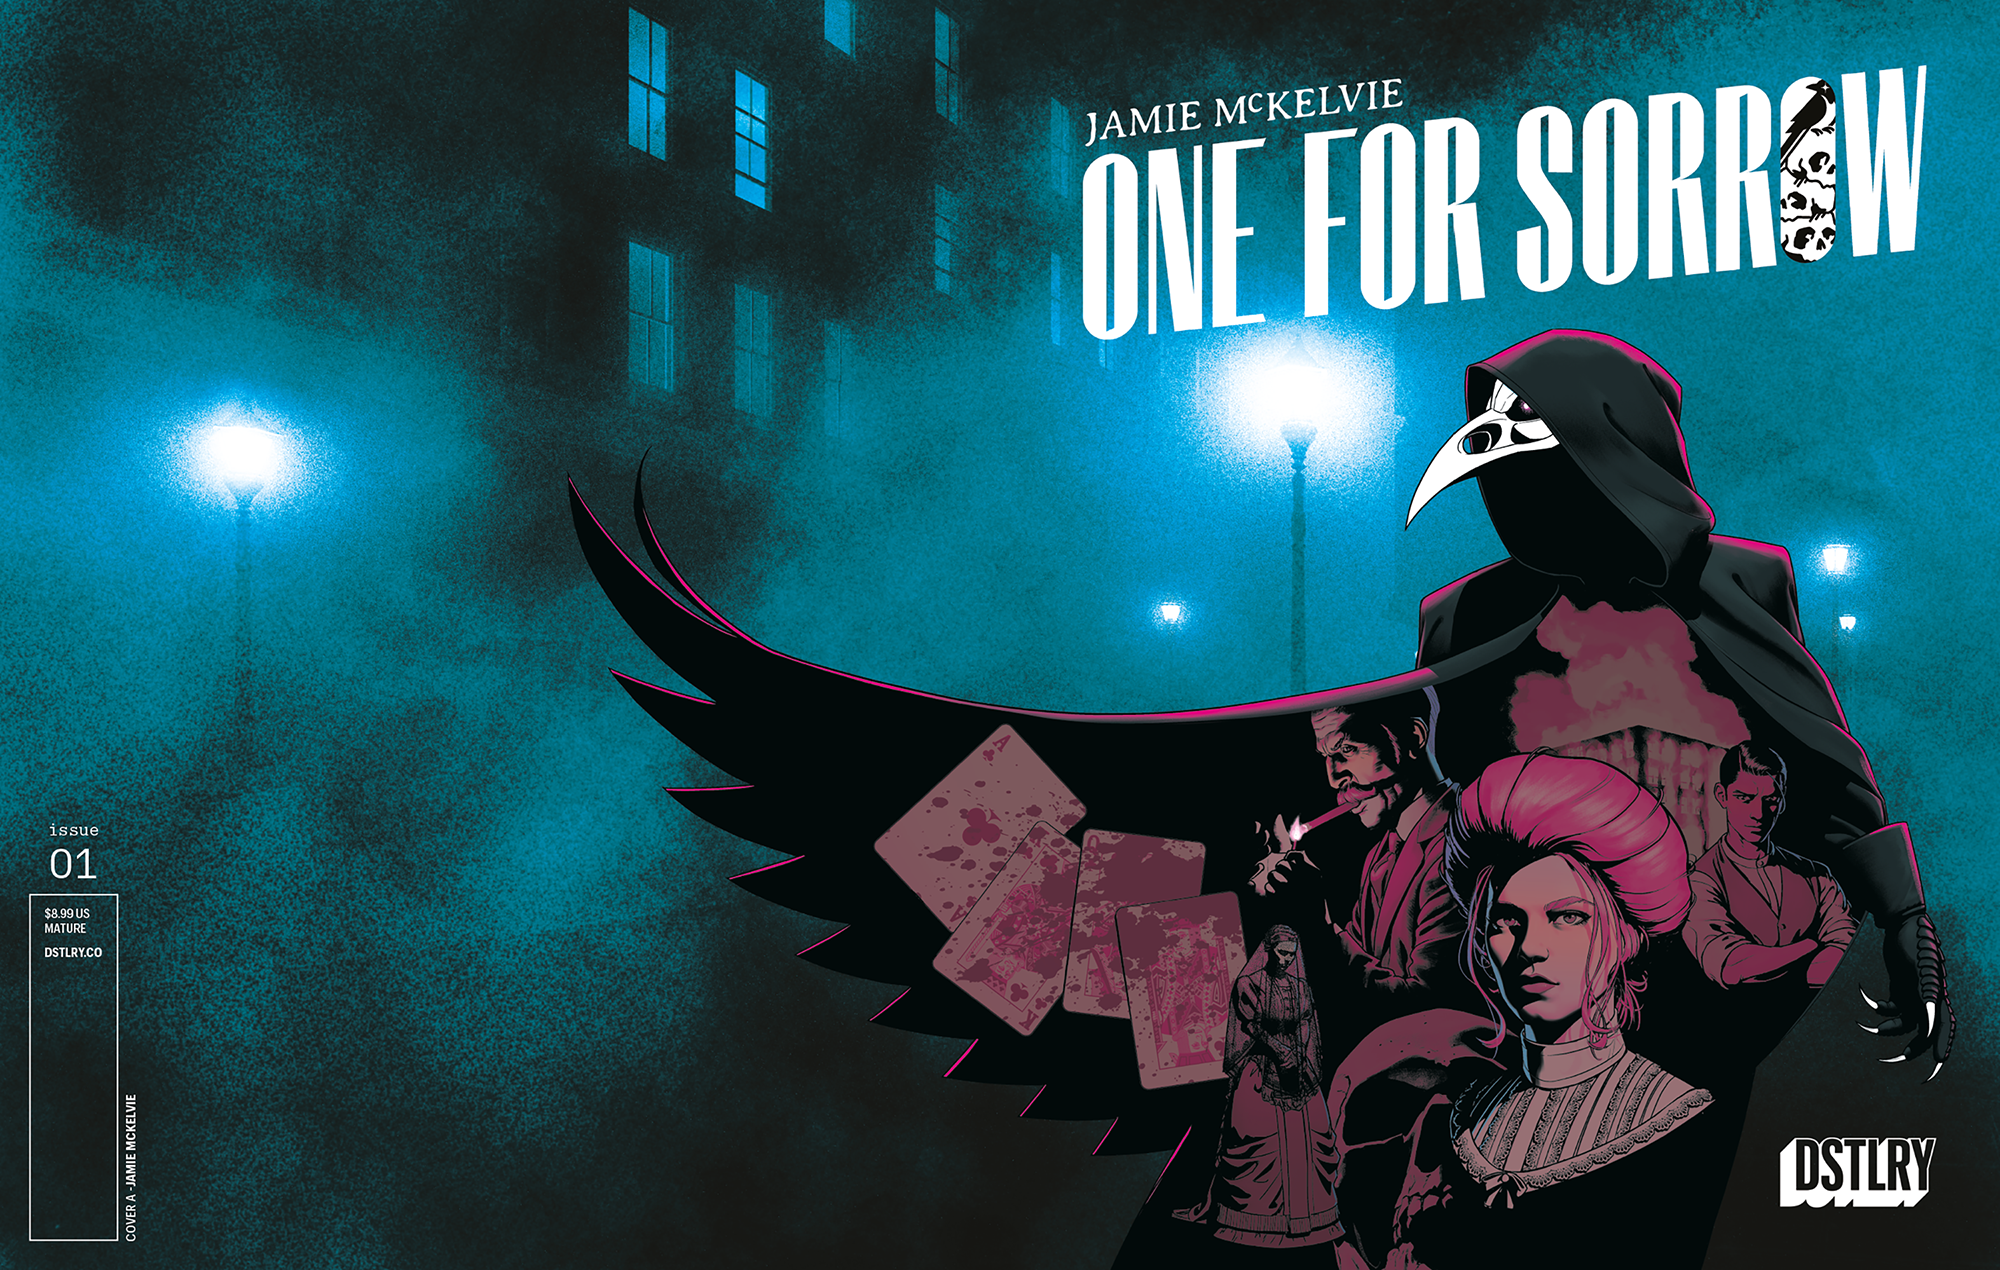 DSTLRY Reveals Stunning Covers for Jamie McKelvie's One For Sorrow (Exclusive)